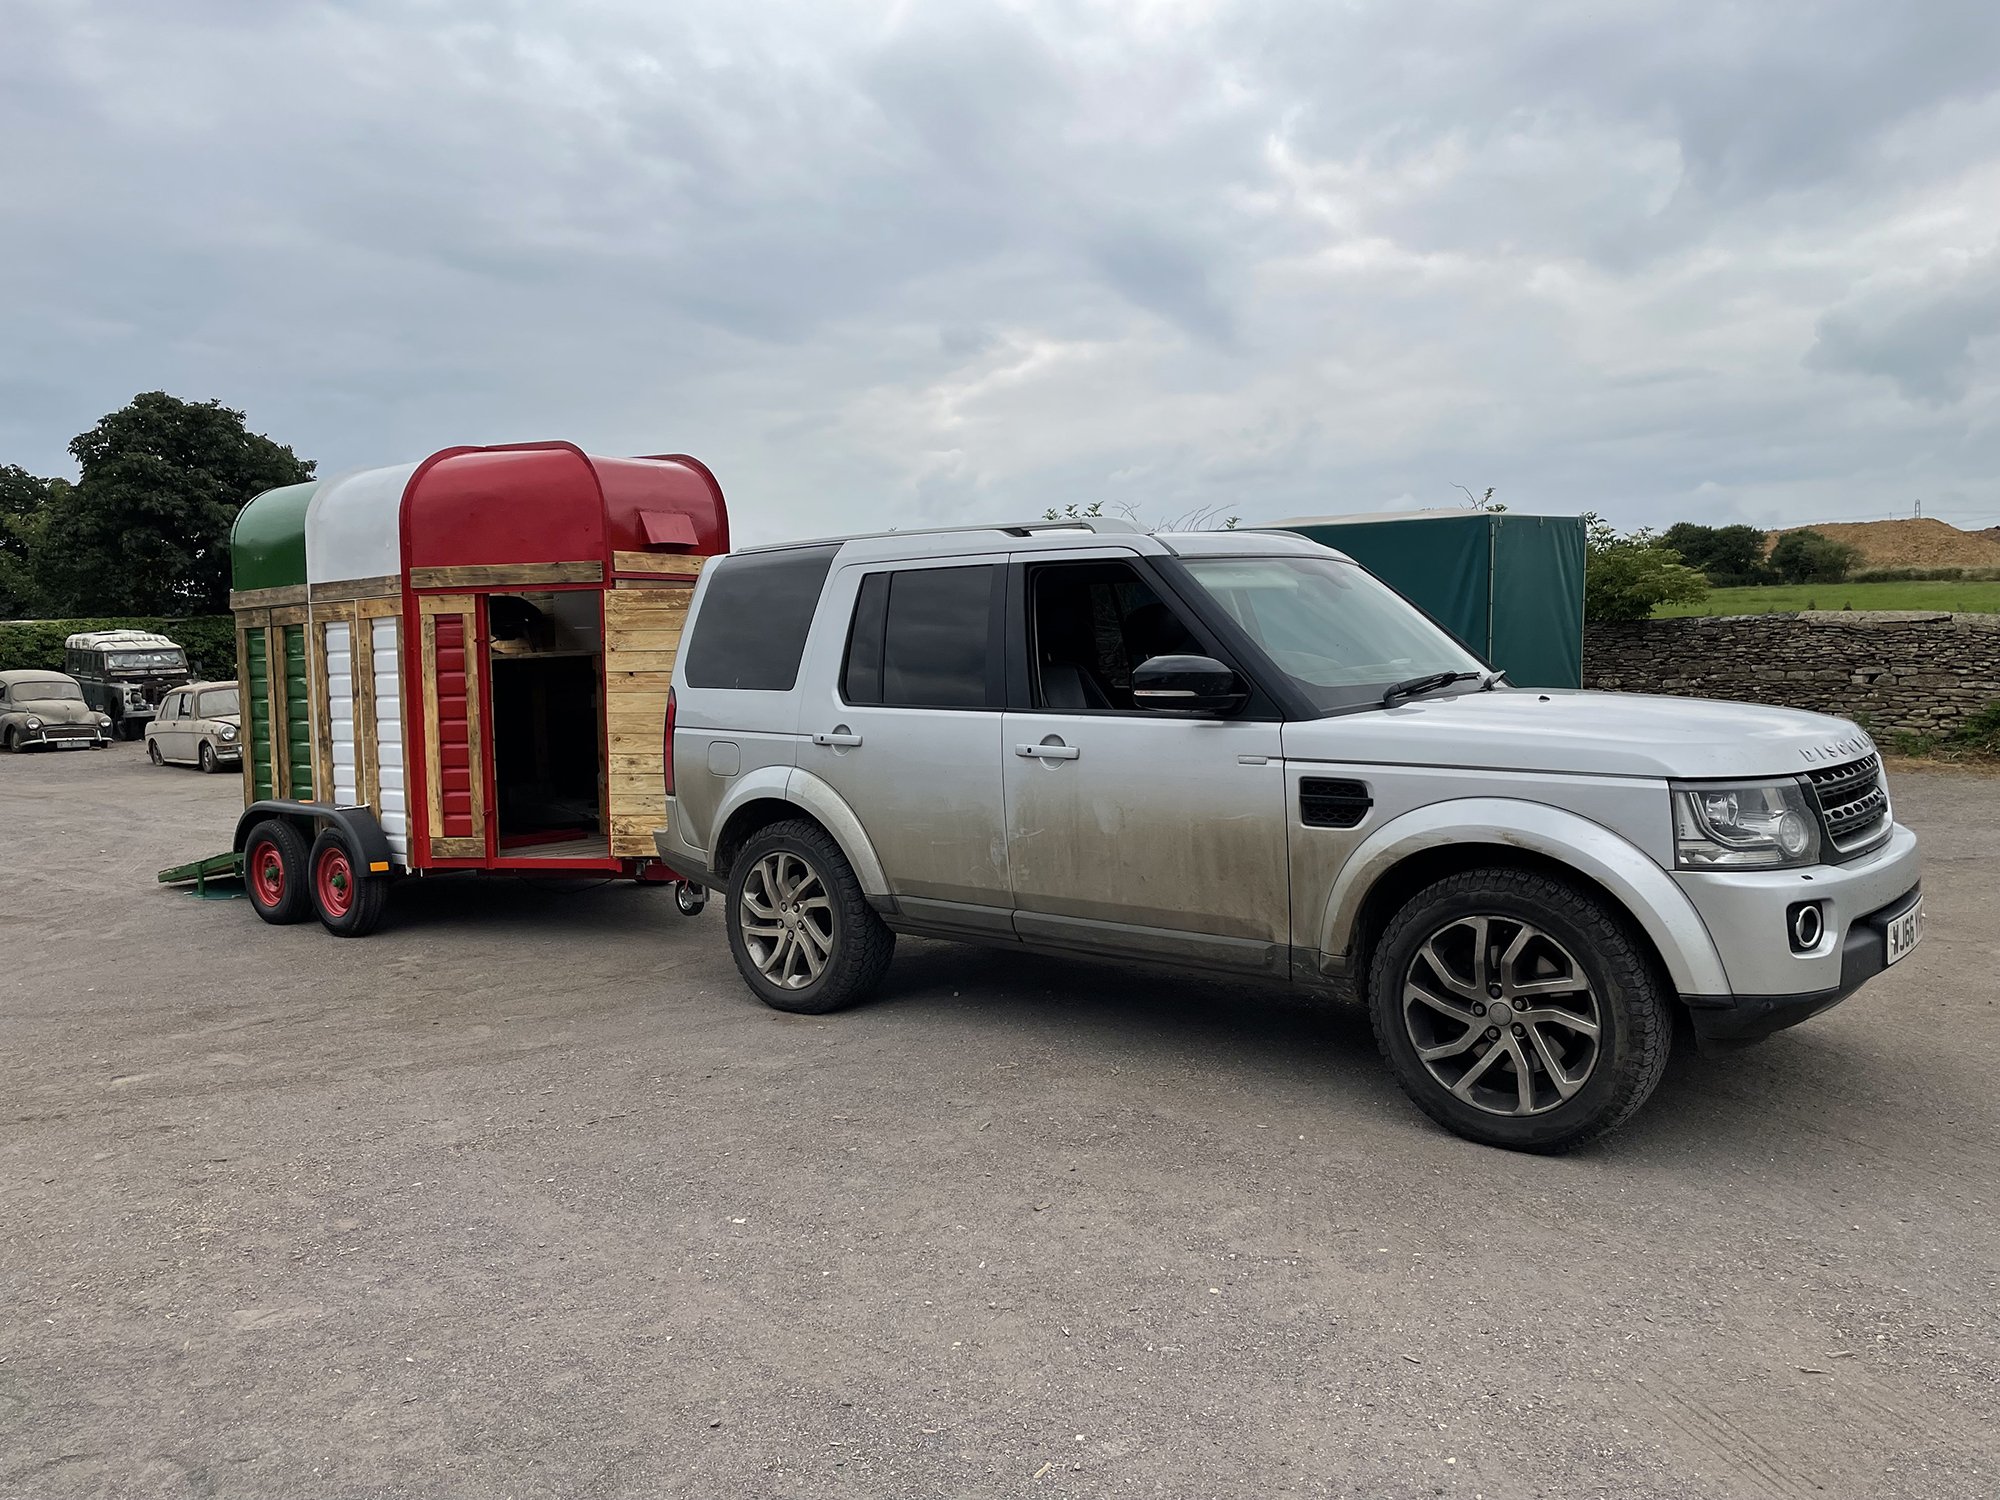 Italian Style Catering Trailer Horse Box - Image 2 of 17